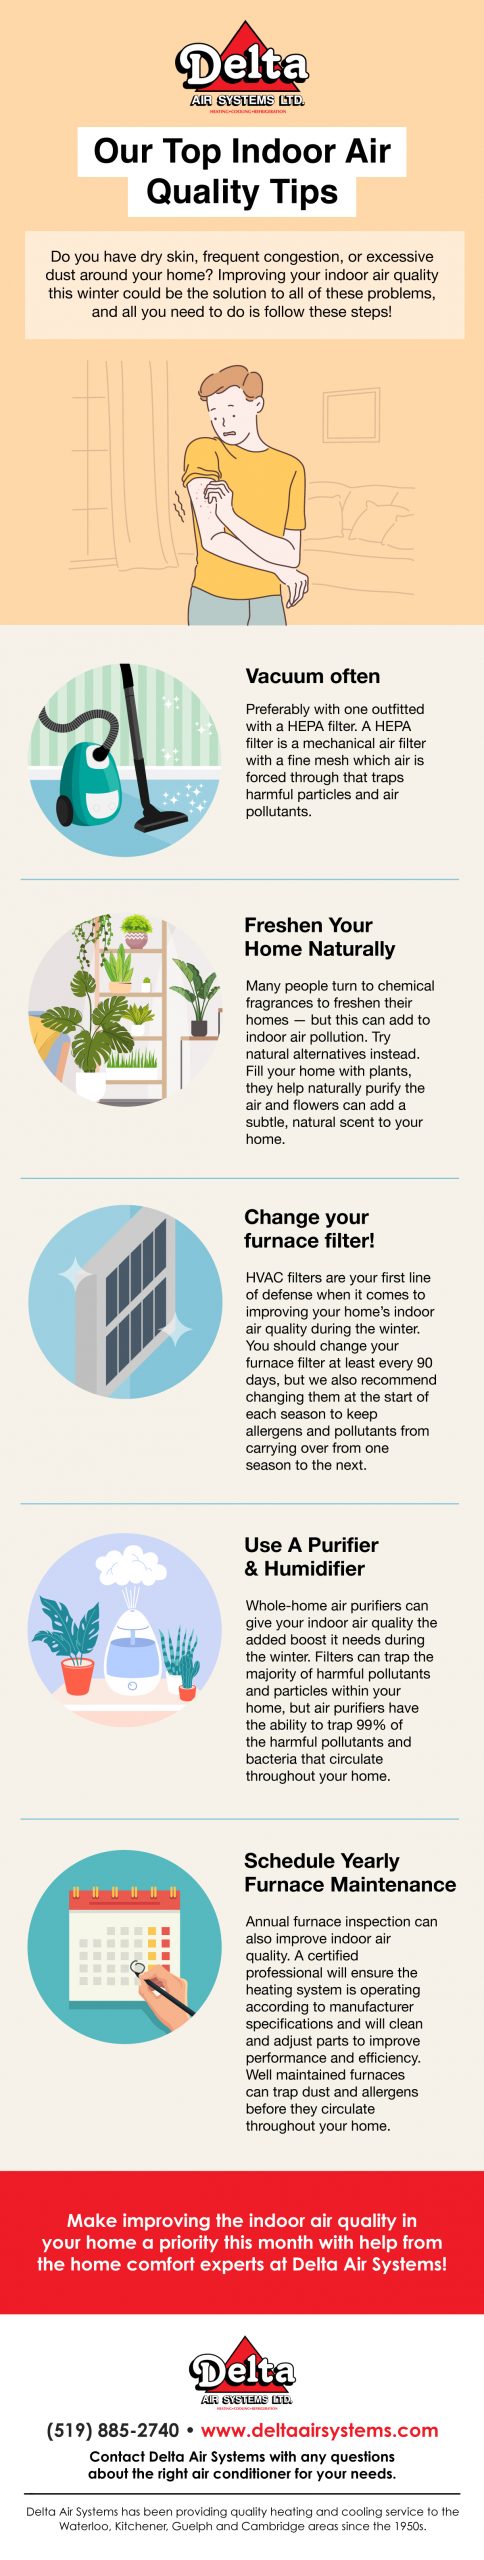 indoor air quality tips